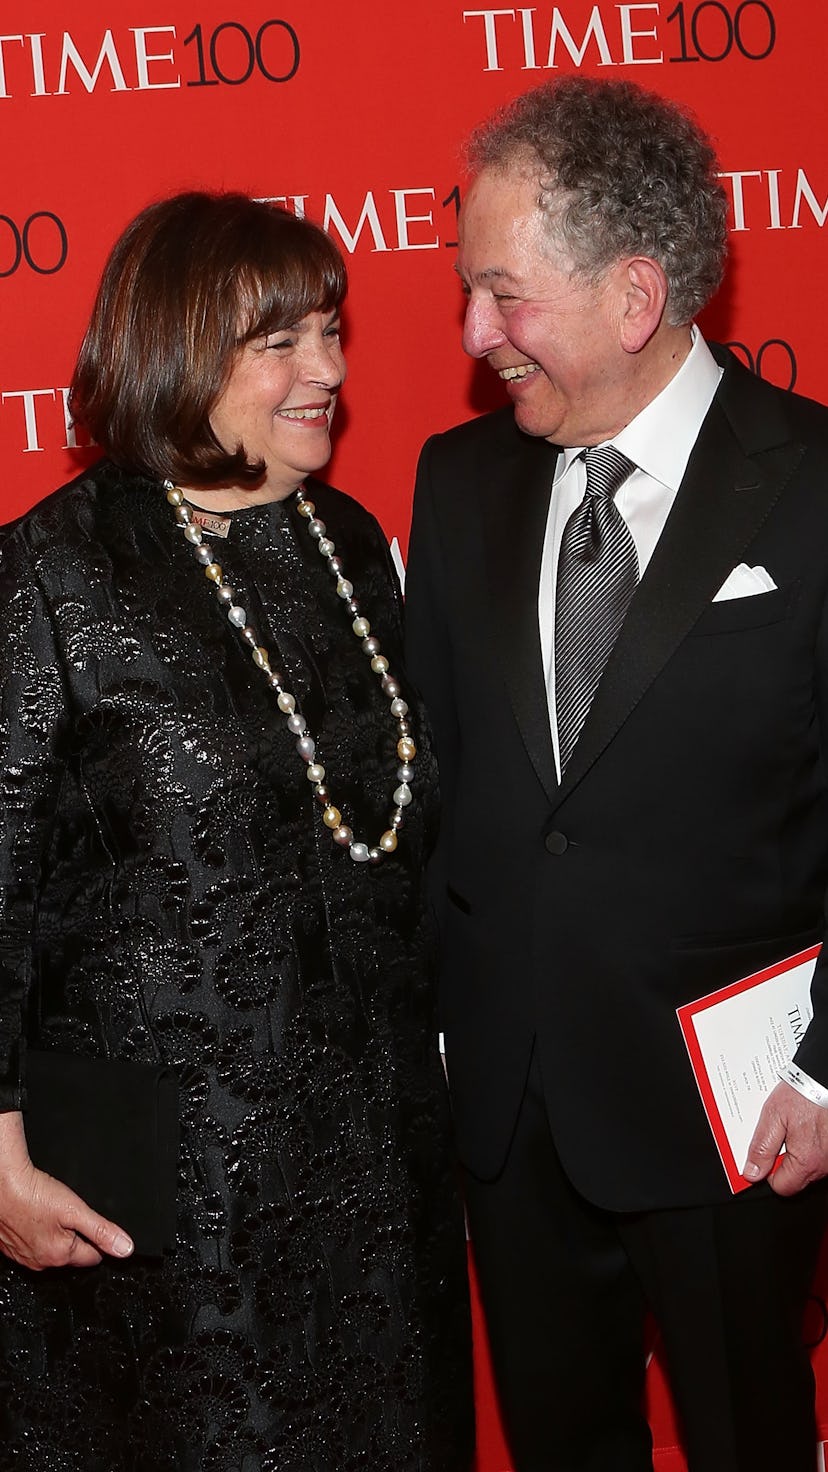 Ina Garten and Husband Jeffrey Garten smiling at each other at the time 100 gala